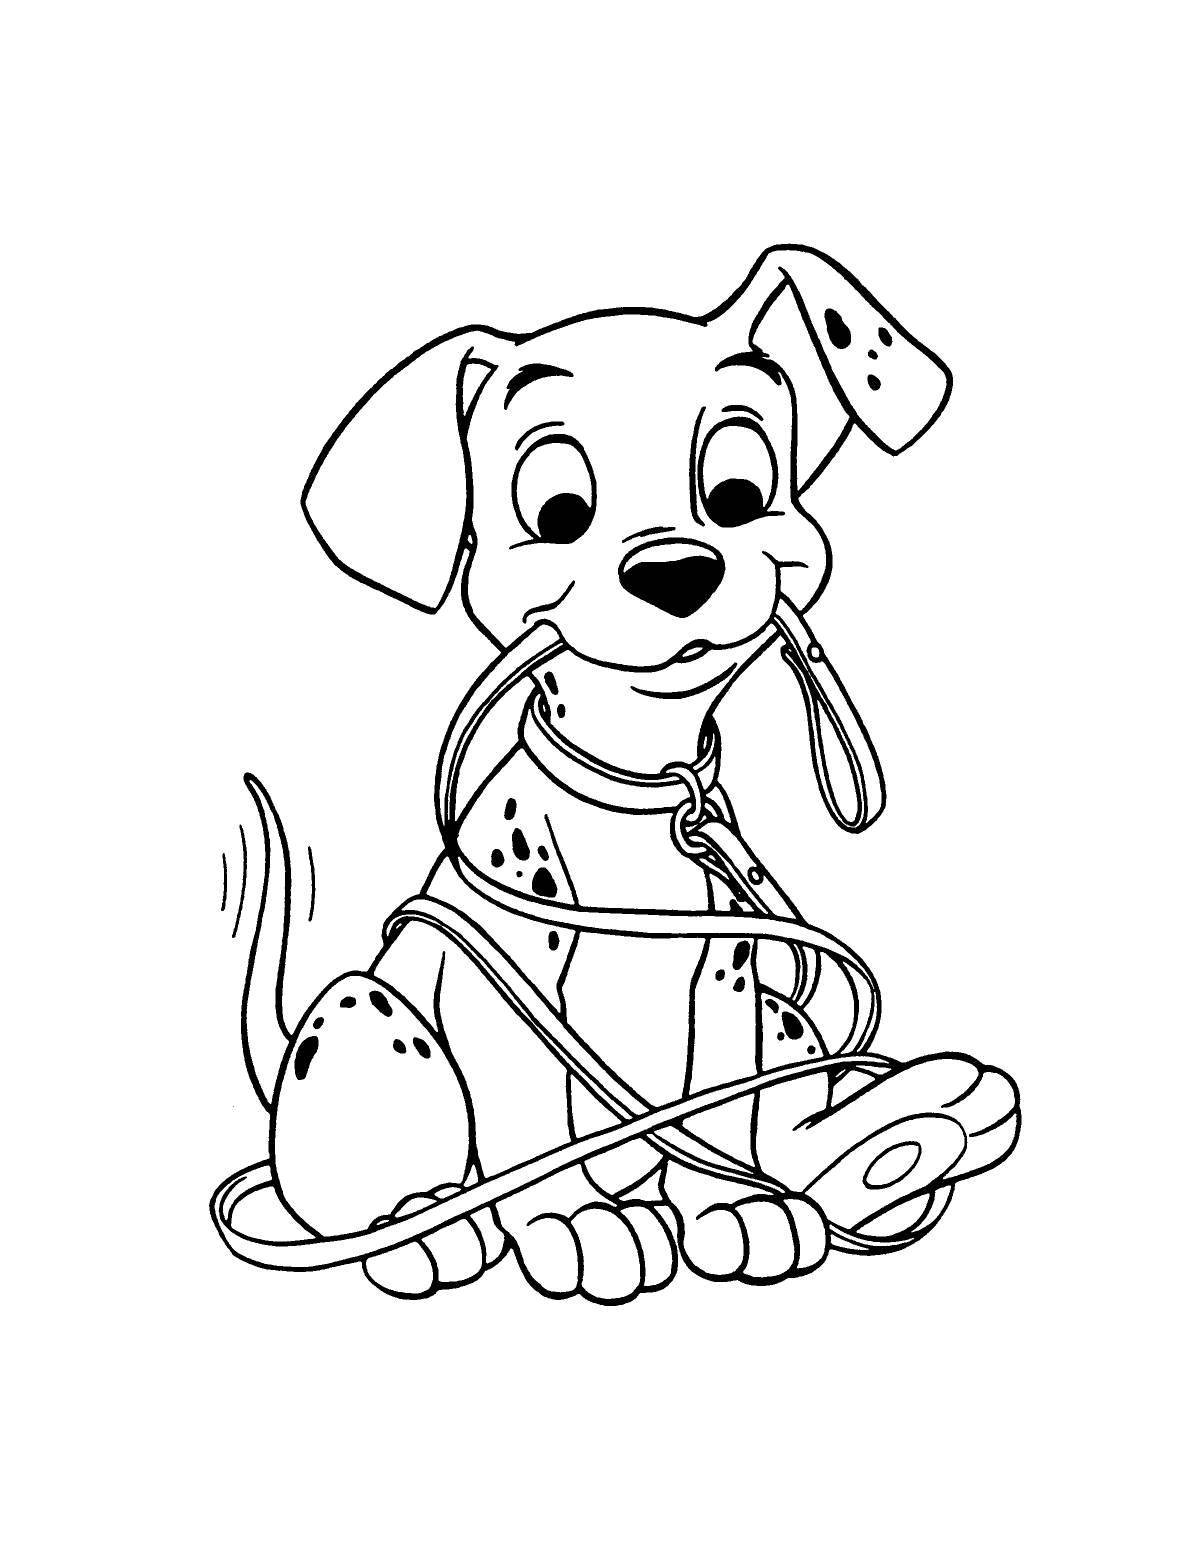 Inquisitive dog coloring pages for boys